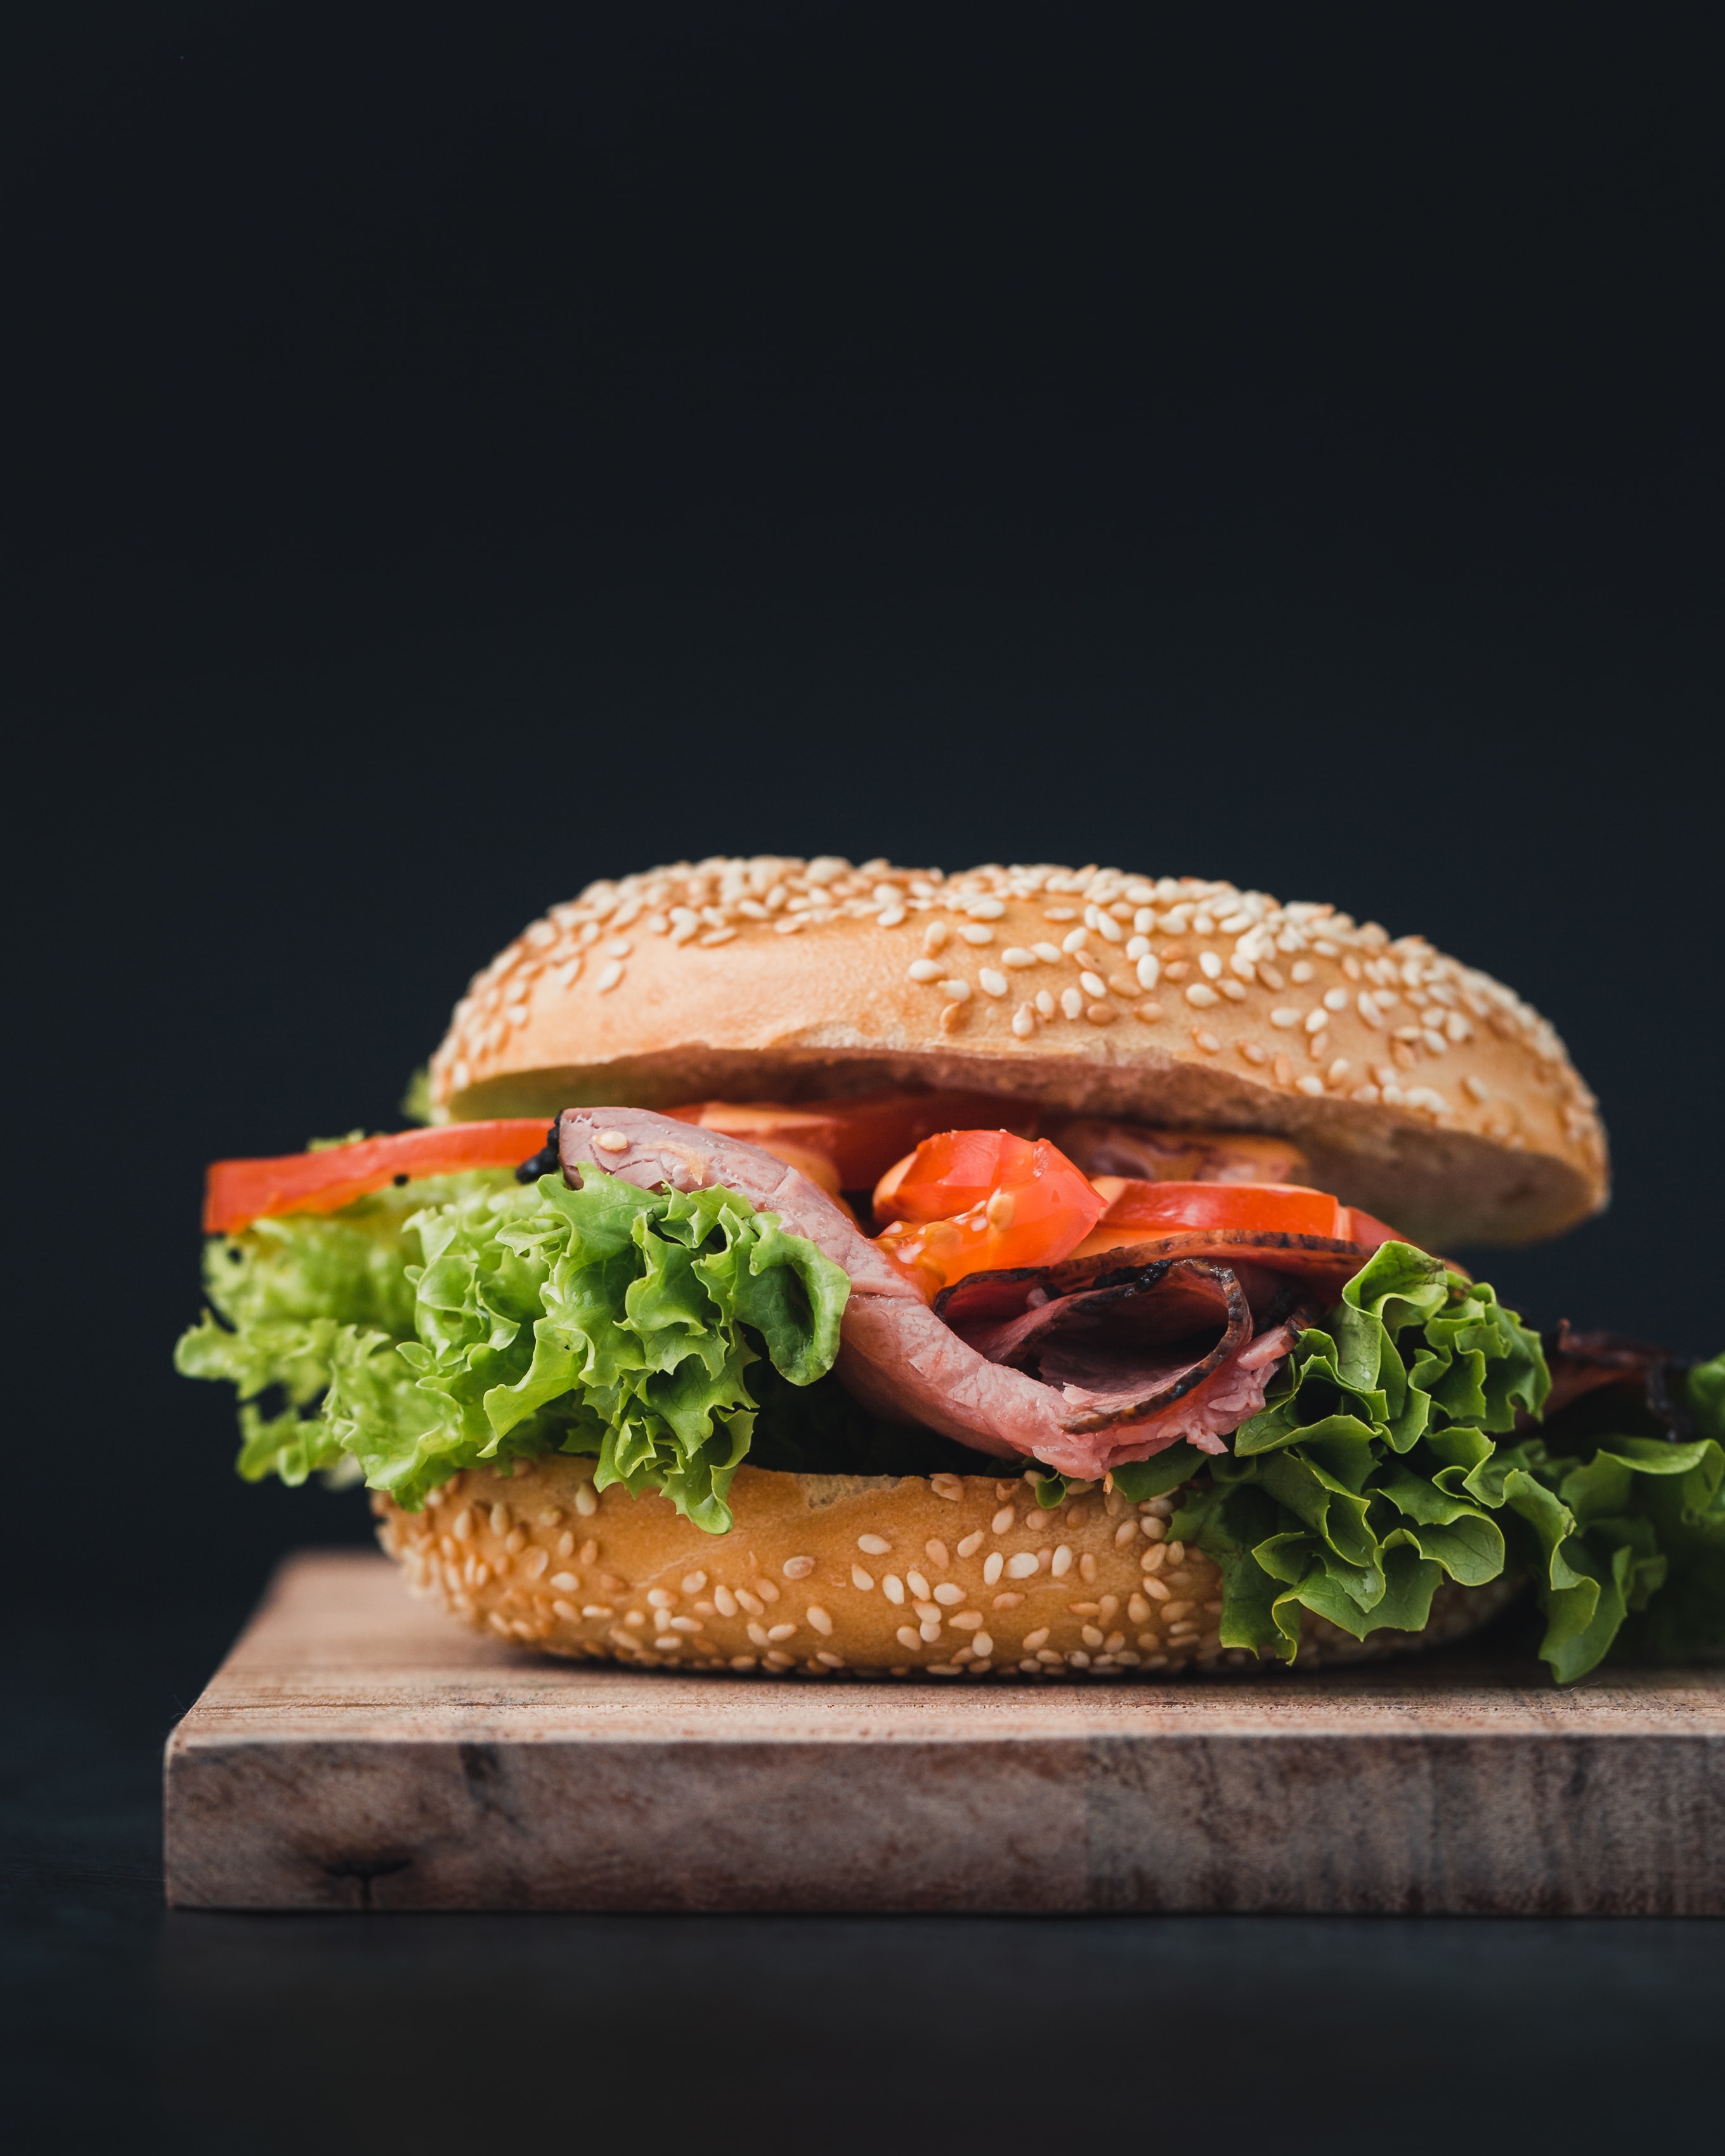 Against a moody black background, there is a sloppy burger on a sesame seed bun, comprised of some deli meat, lettuce, and tomato. The entire burger is placed on a wood cutting board and the photo has a very shallow depth of field, so the back of the cutting board is blurry.